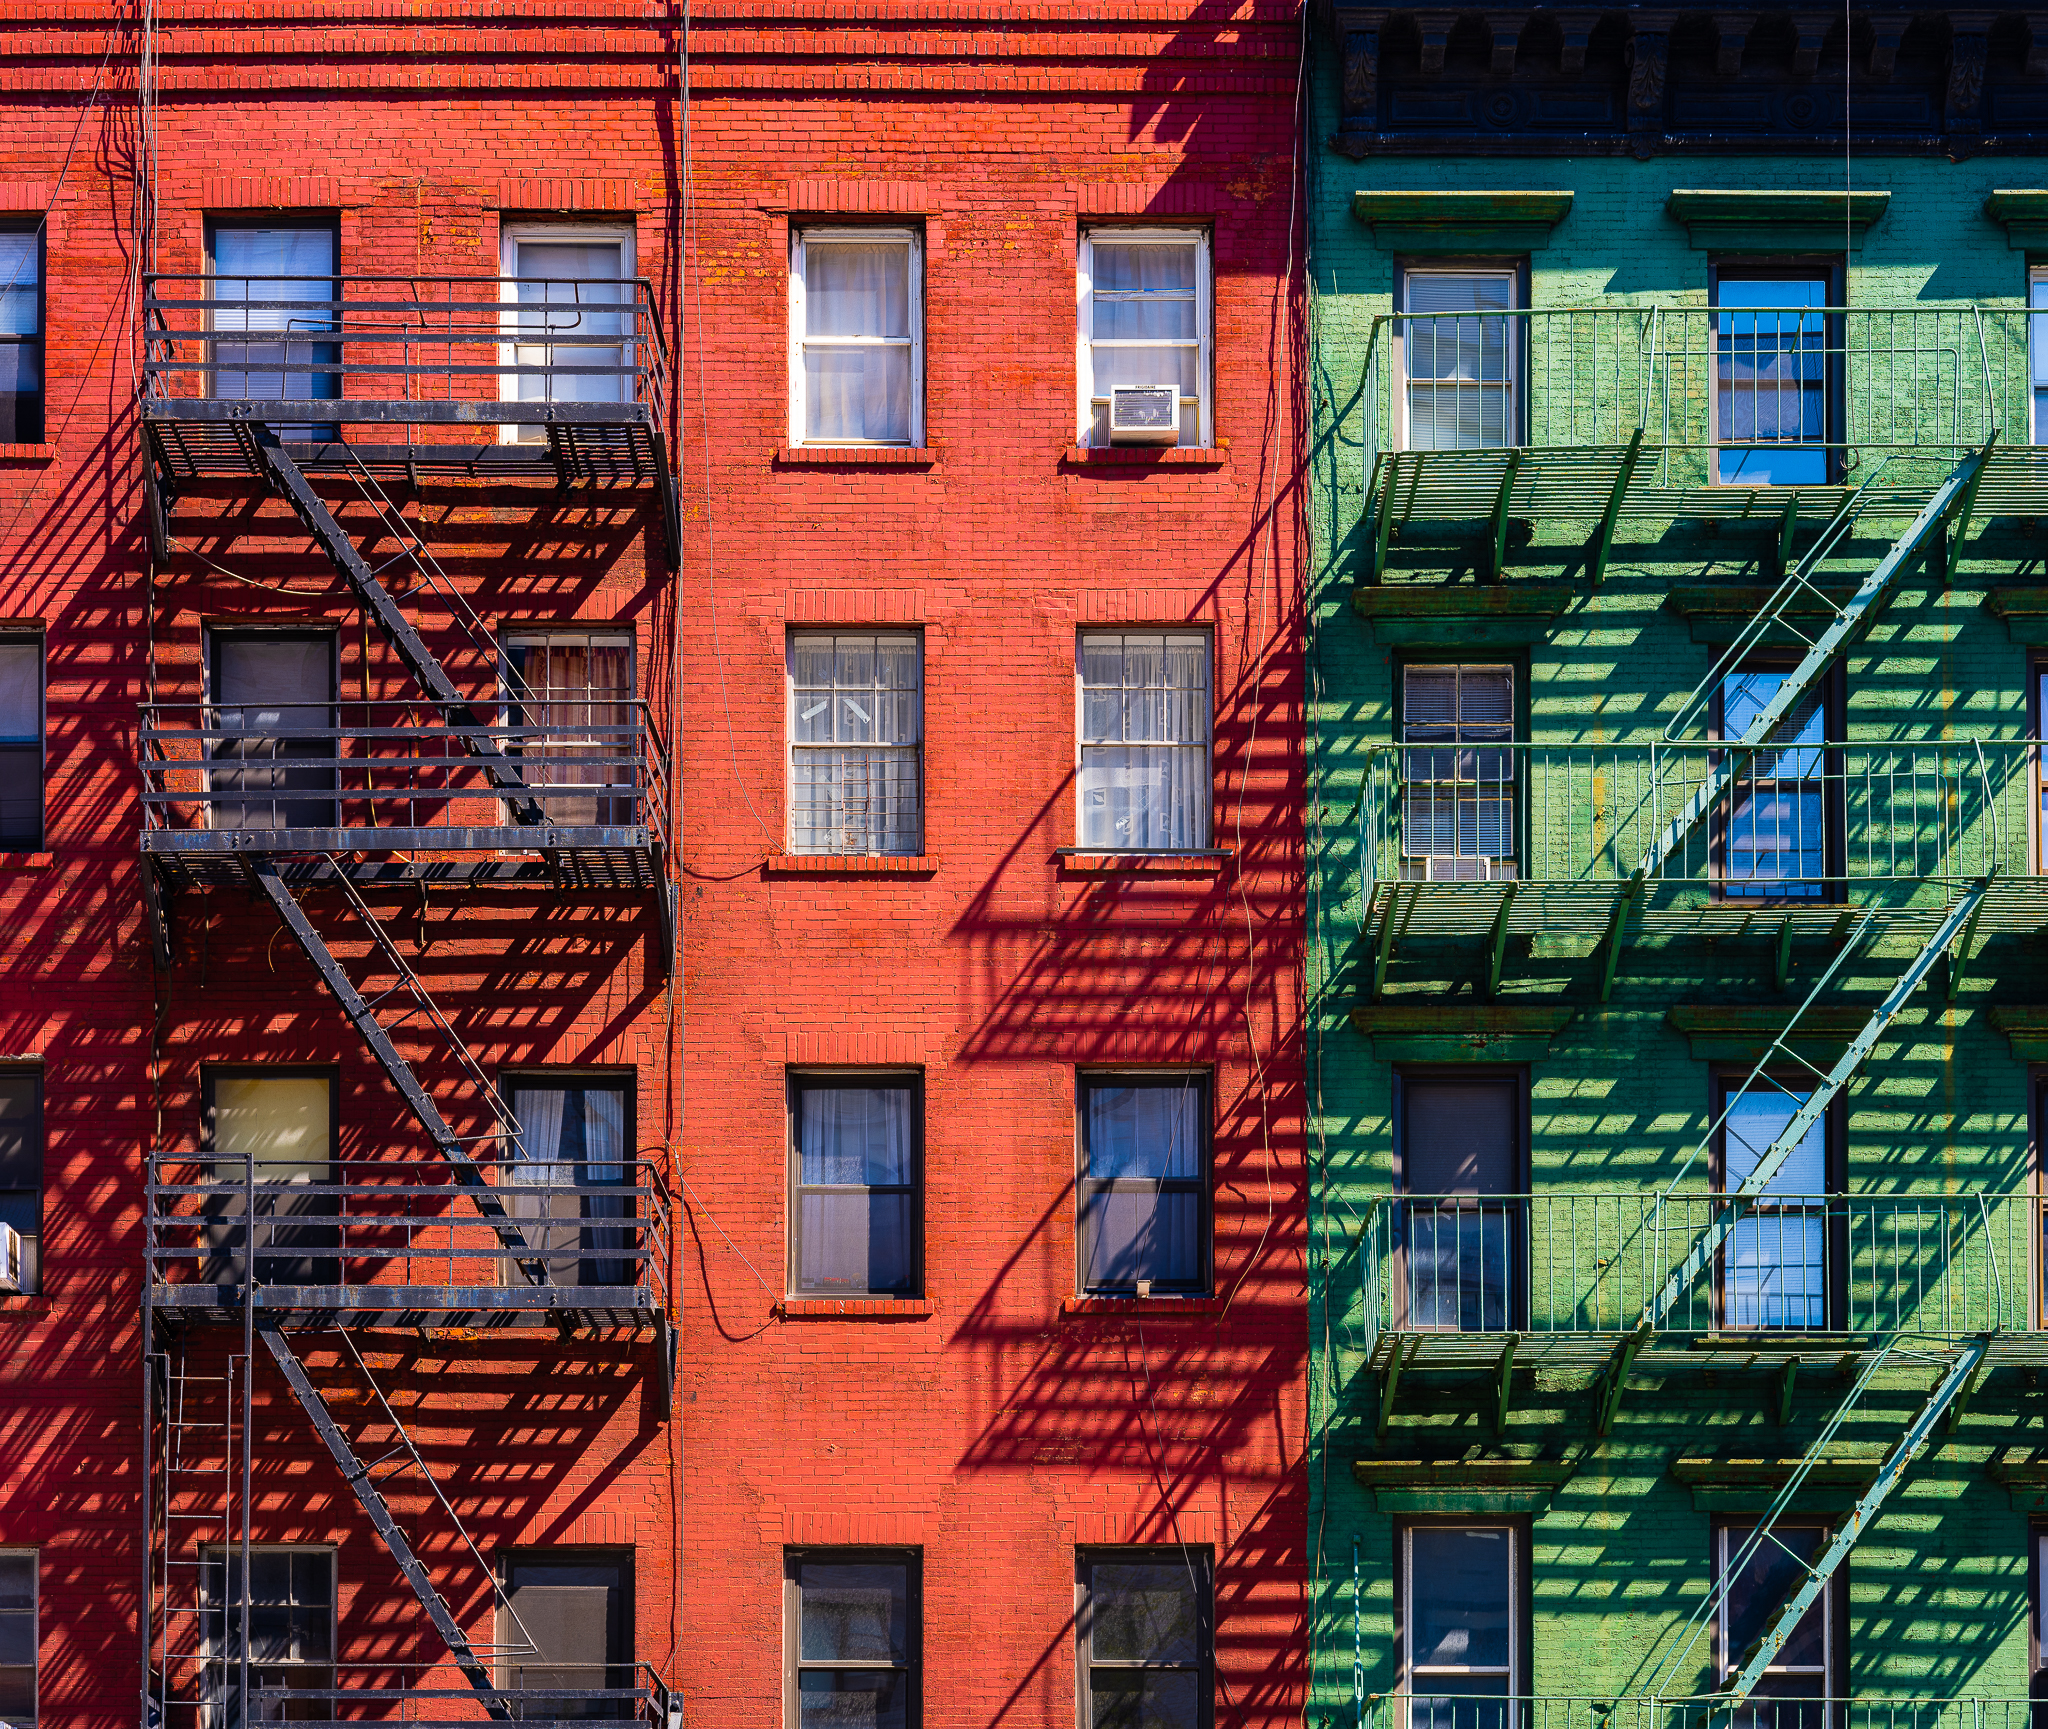 a photo of classic new york architecture with fire escapes